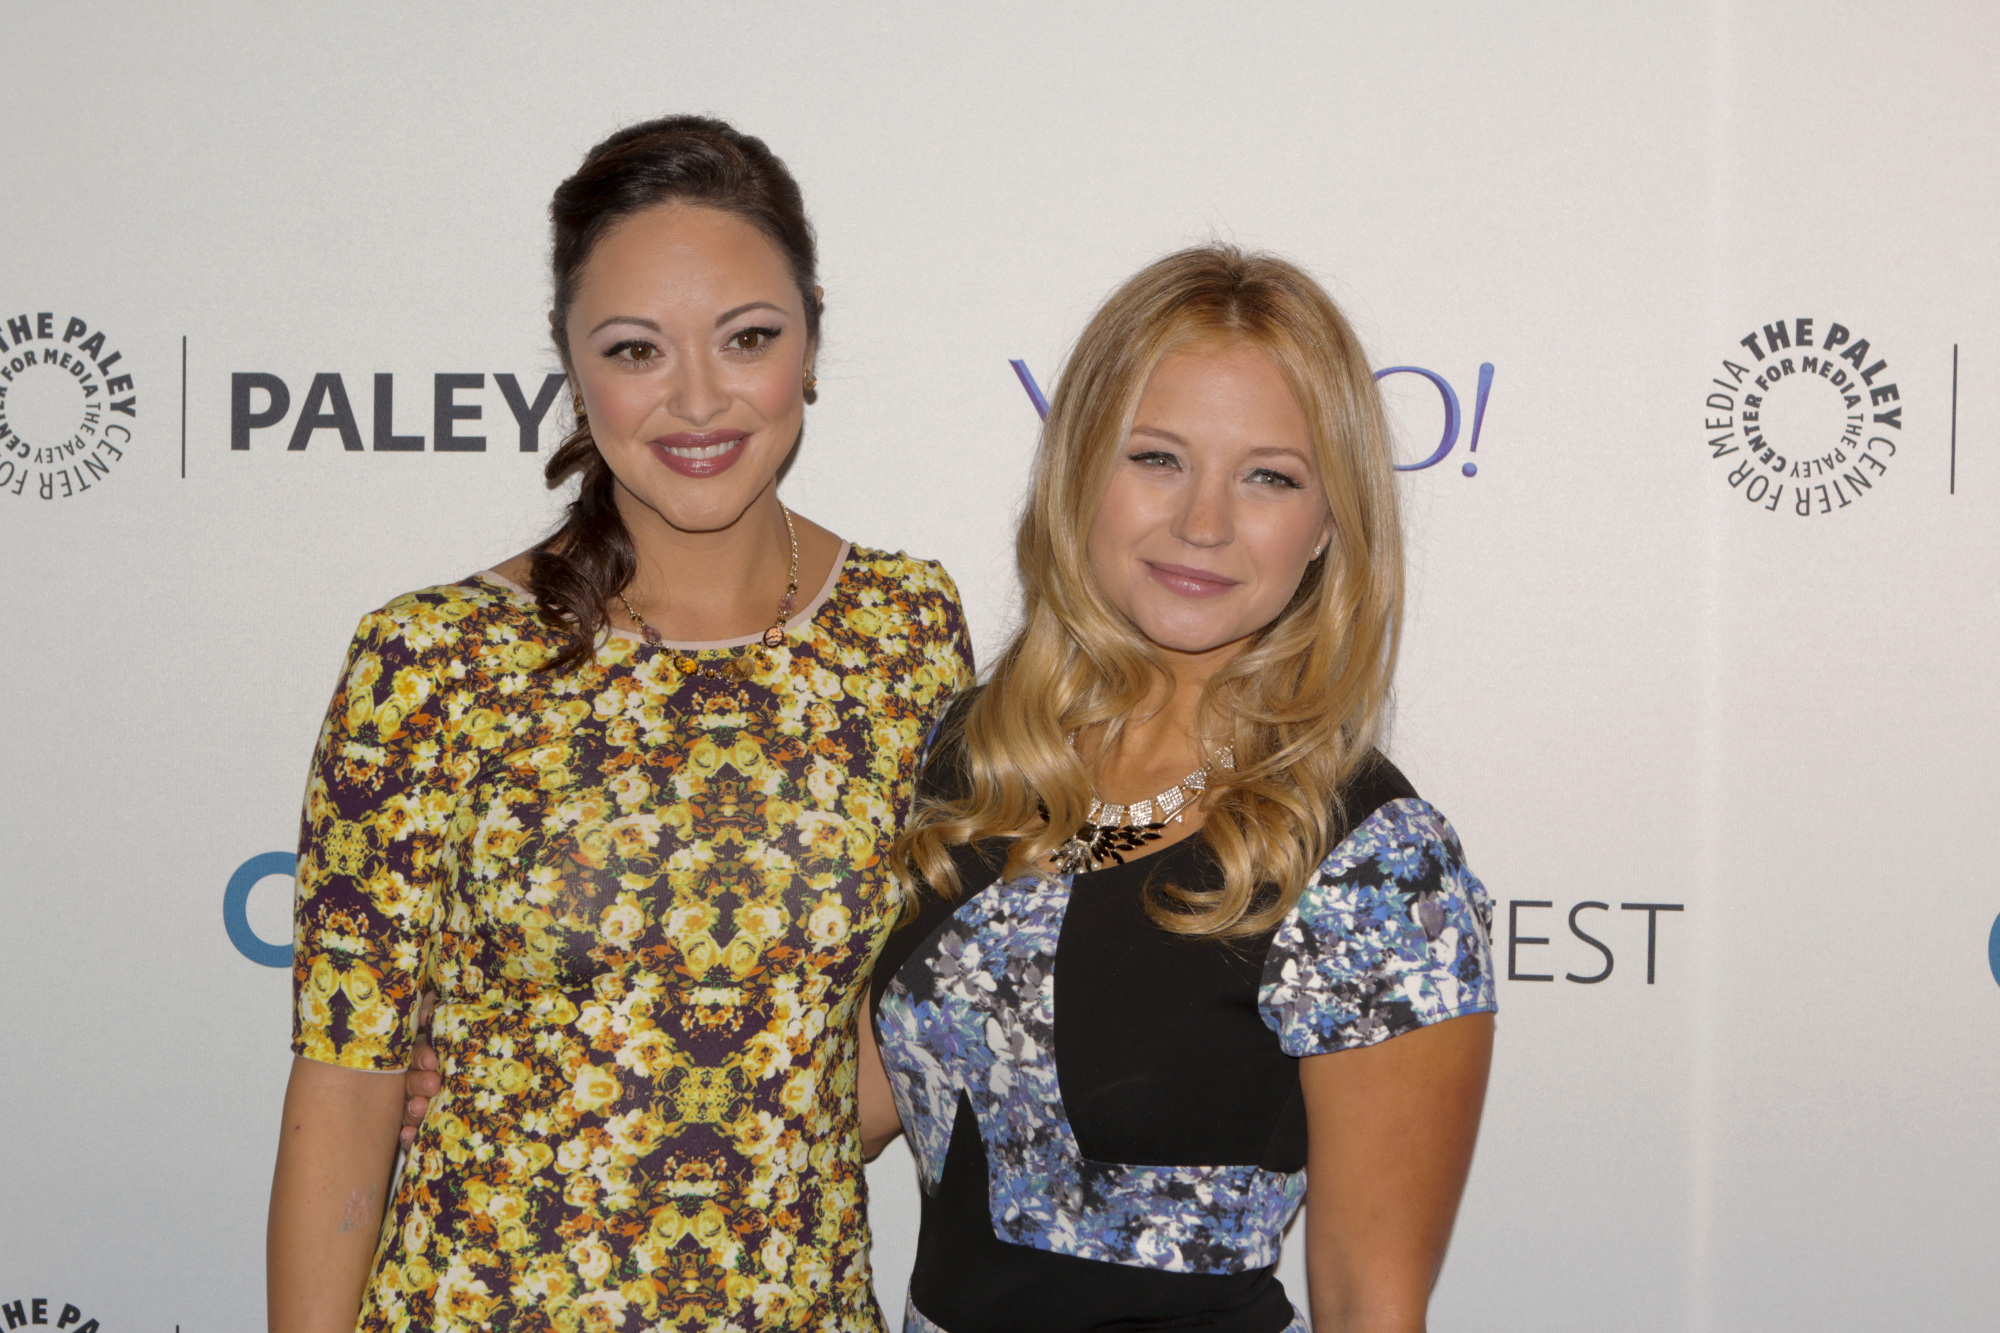 3. You can tell Marisa Ramirez and Vanessa Ray are totally besties off-camera.